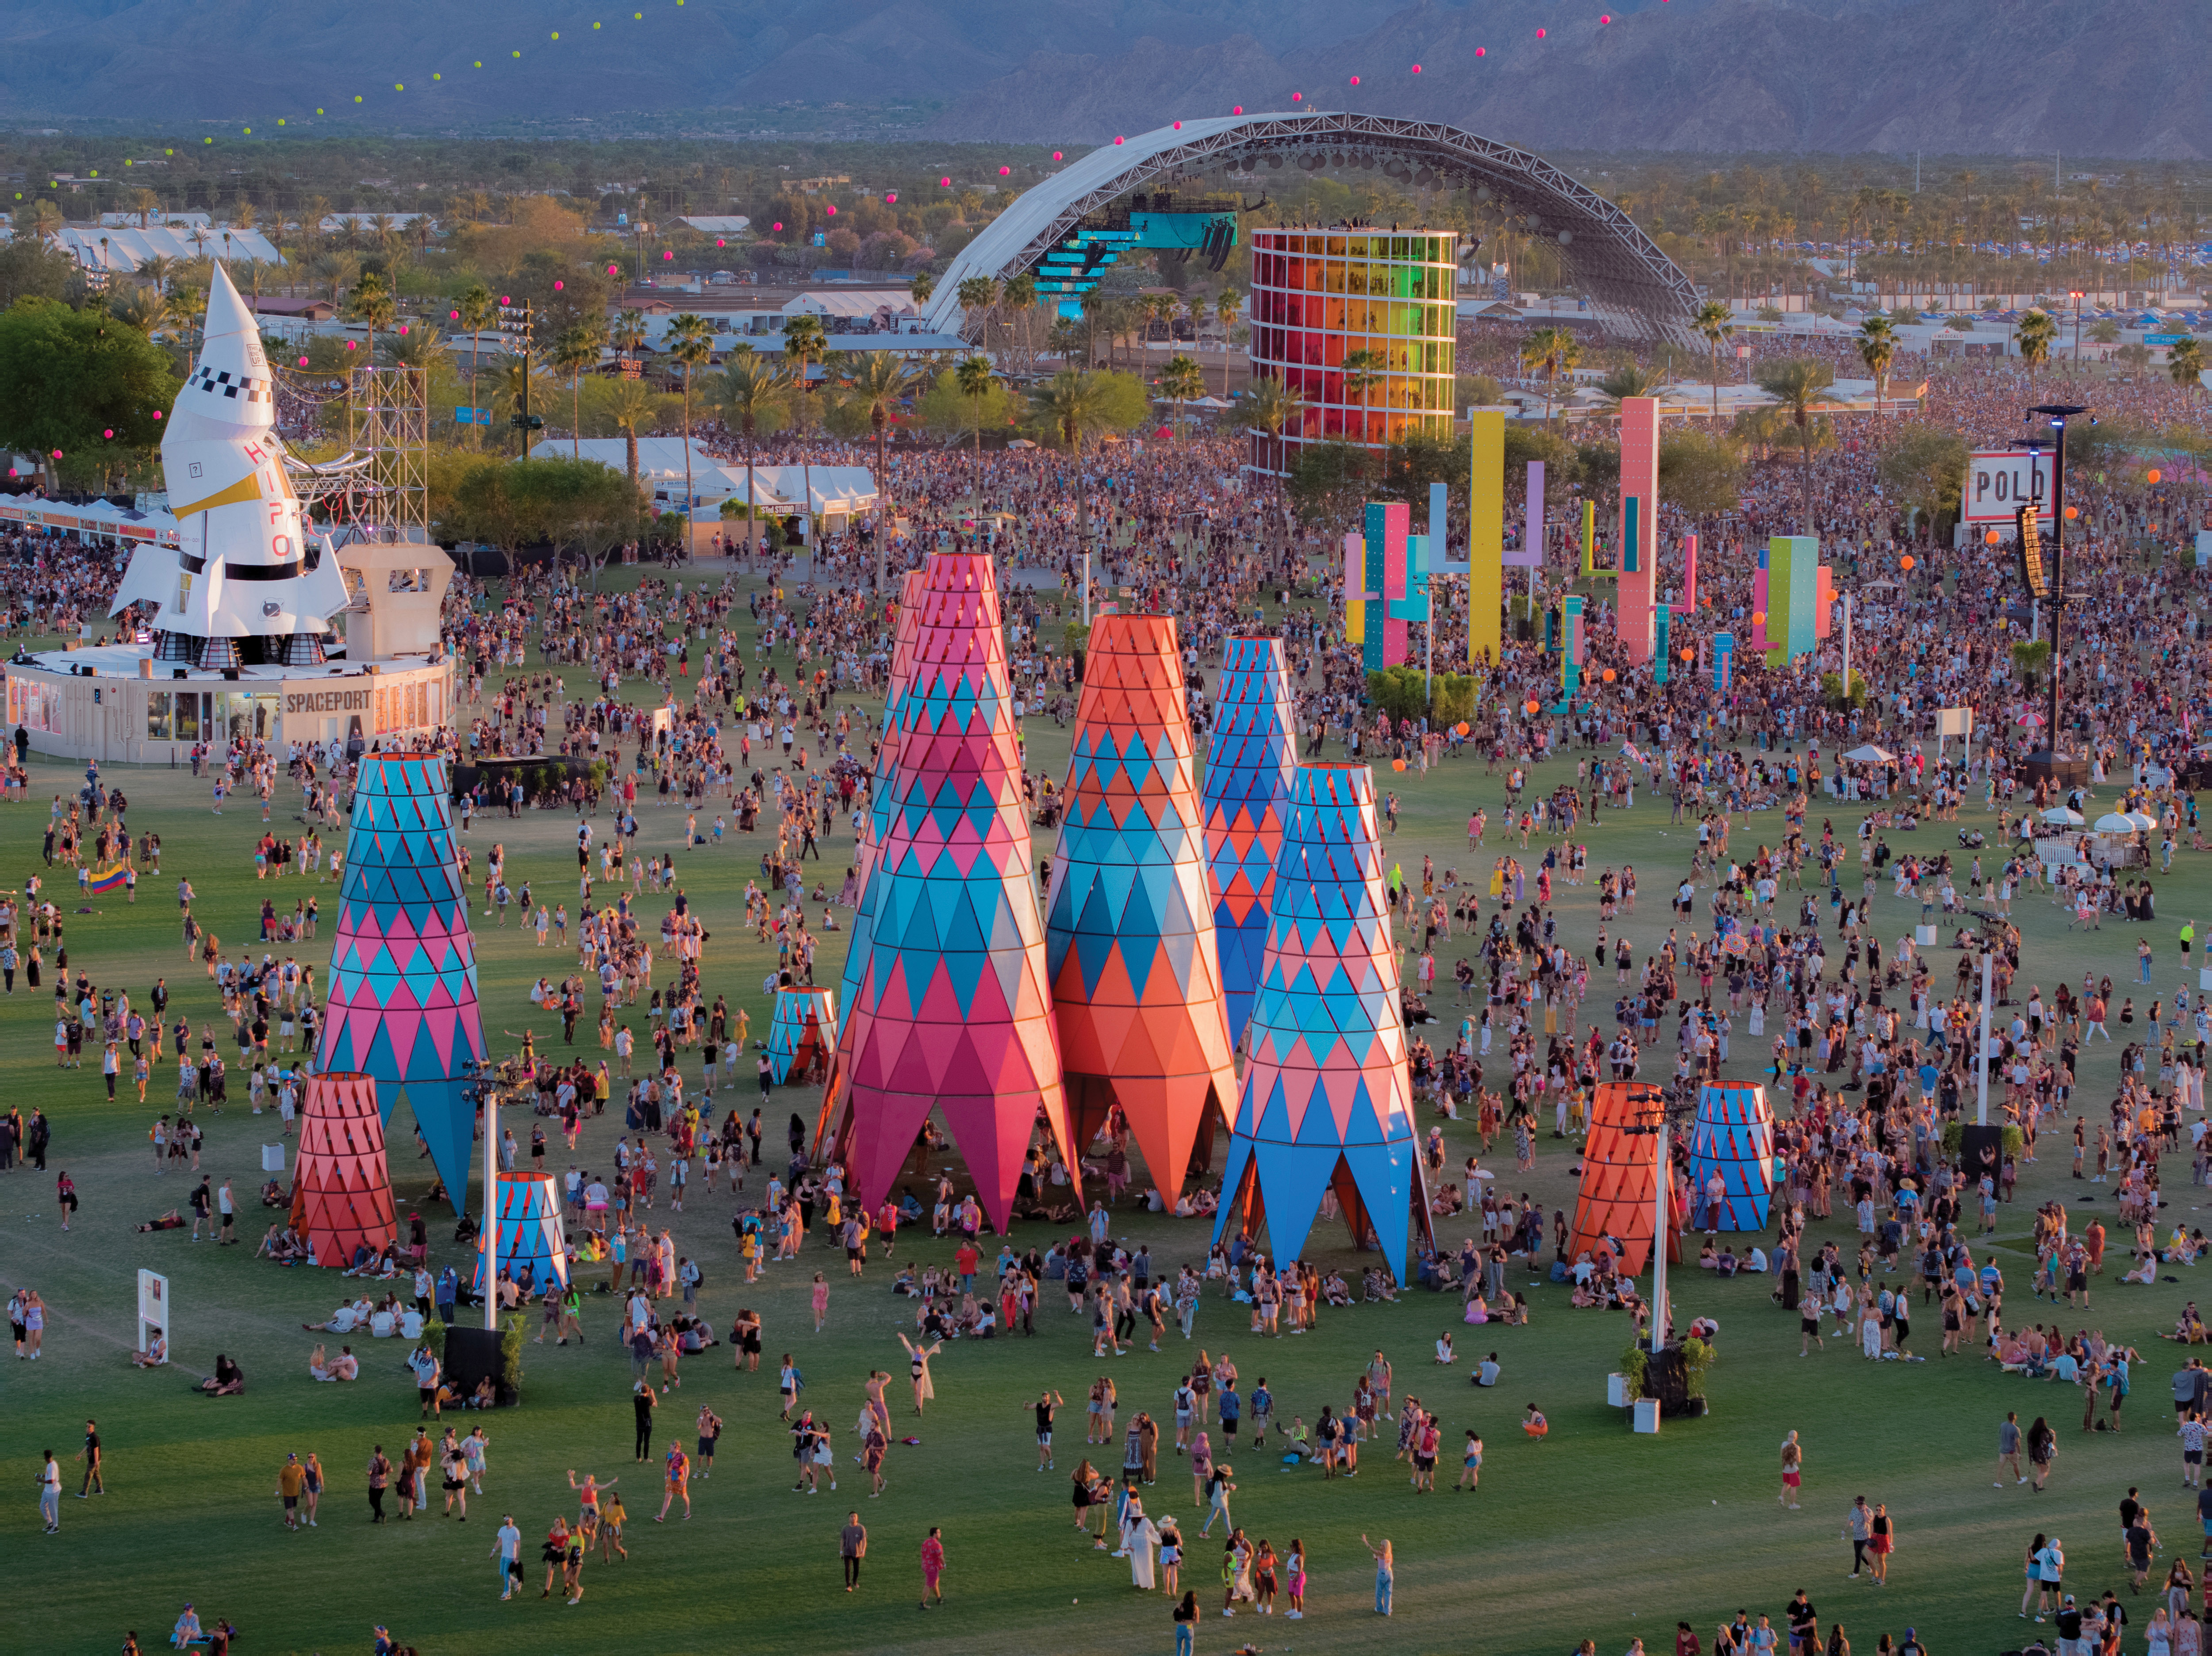 An aerial photo of the Coachella music festival art installations and thousands of concert-goers.